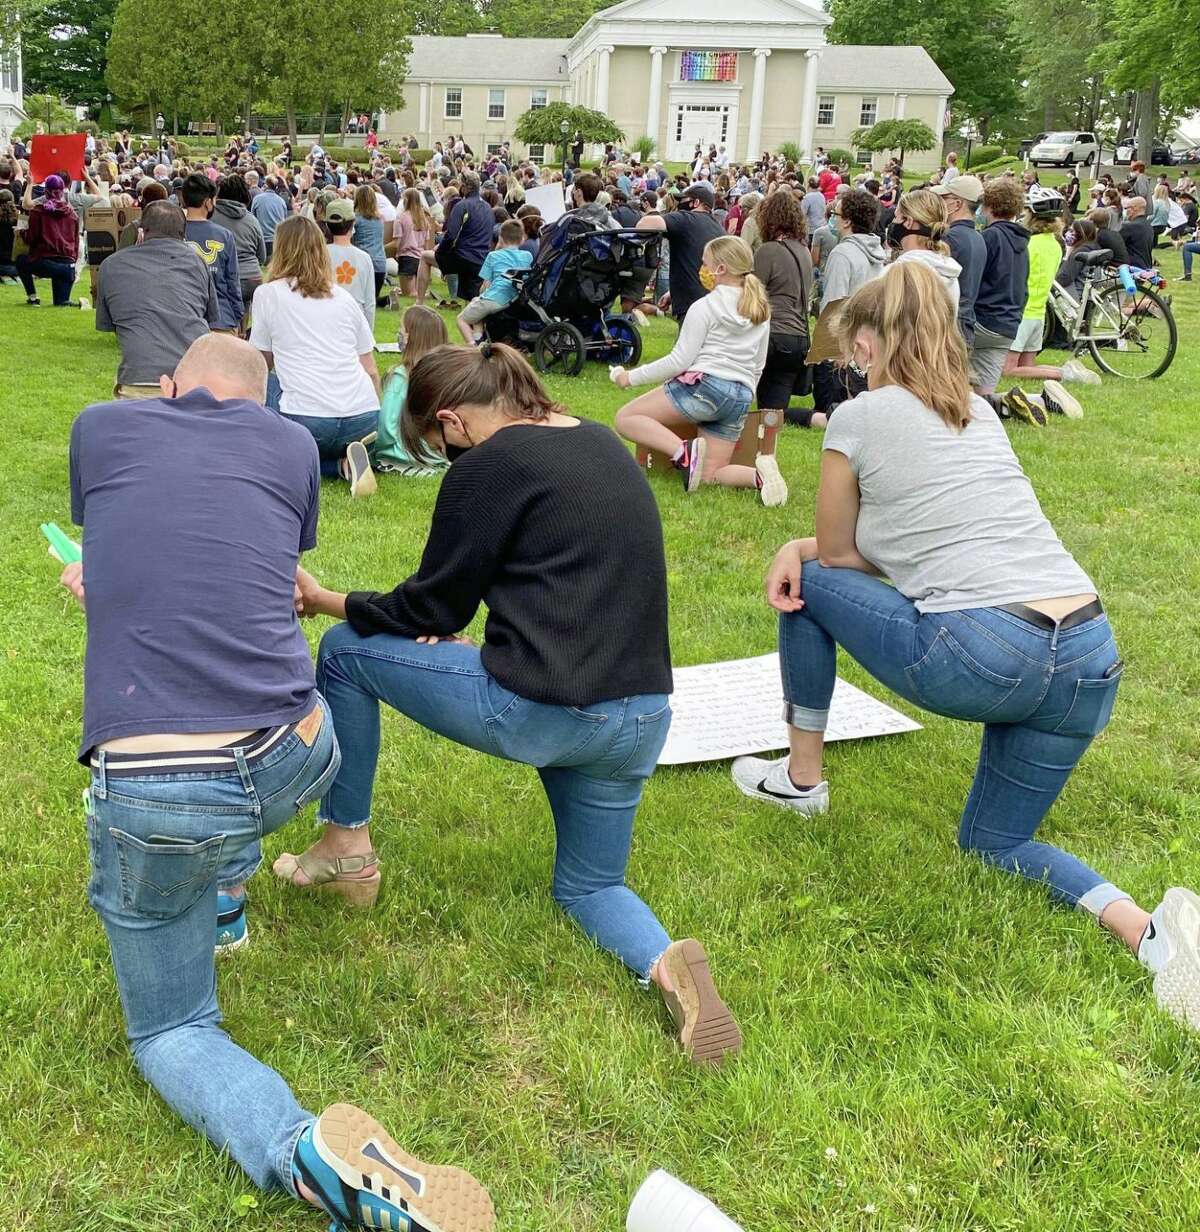 In Madison, a throng of more than 400 people gathered on the front lawn of The First Congregational Church for the Stand In Solidarity vigil which only lasted about 20 minutes.